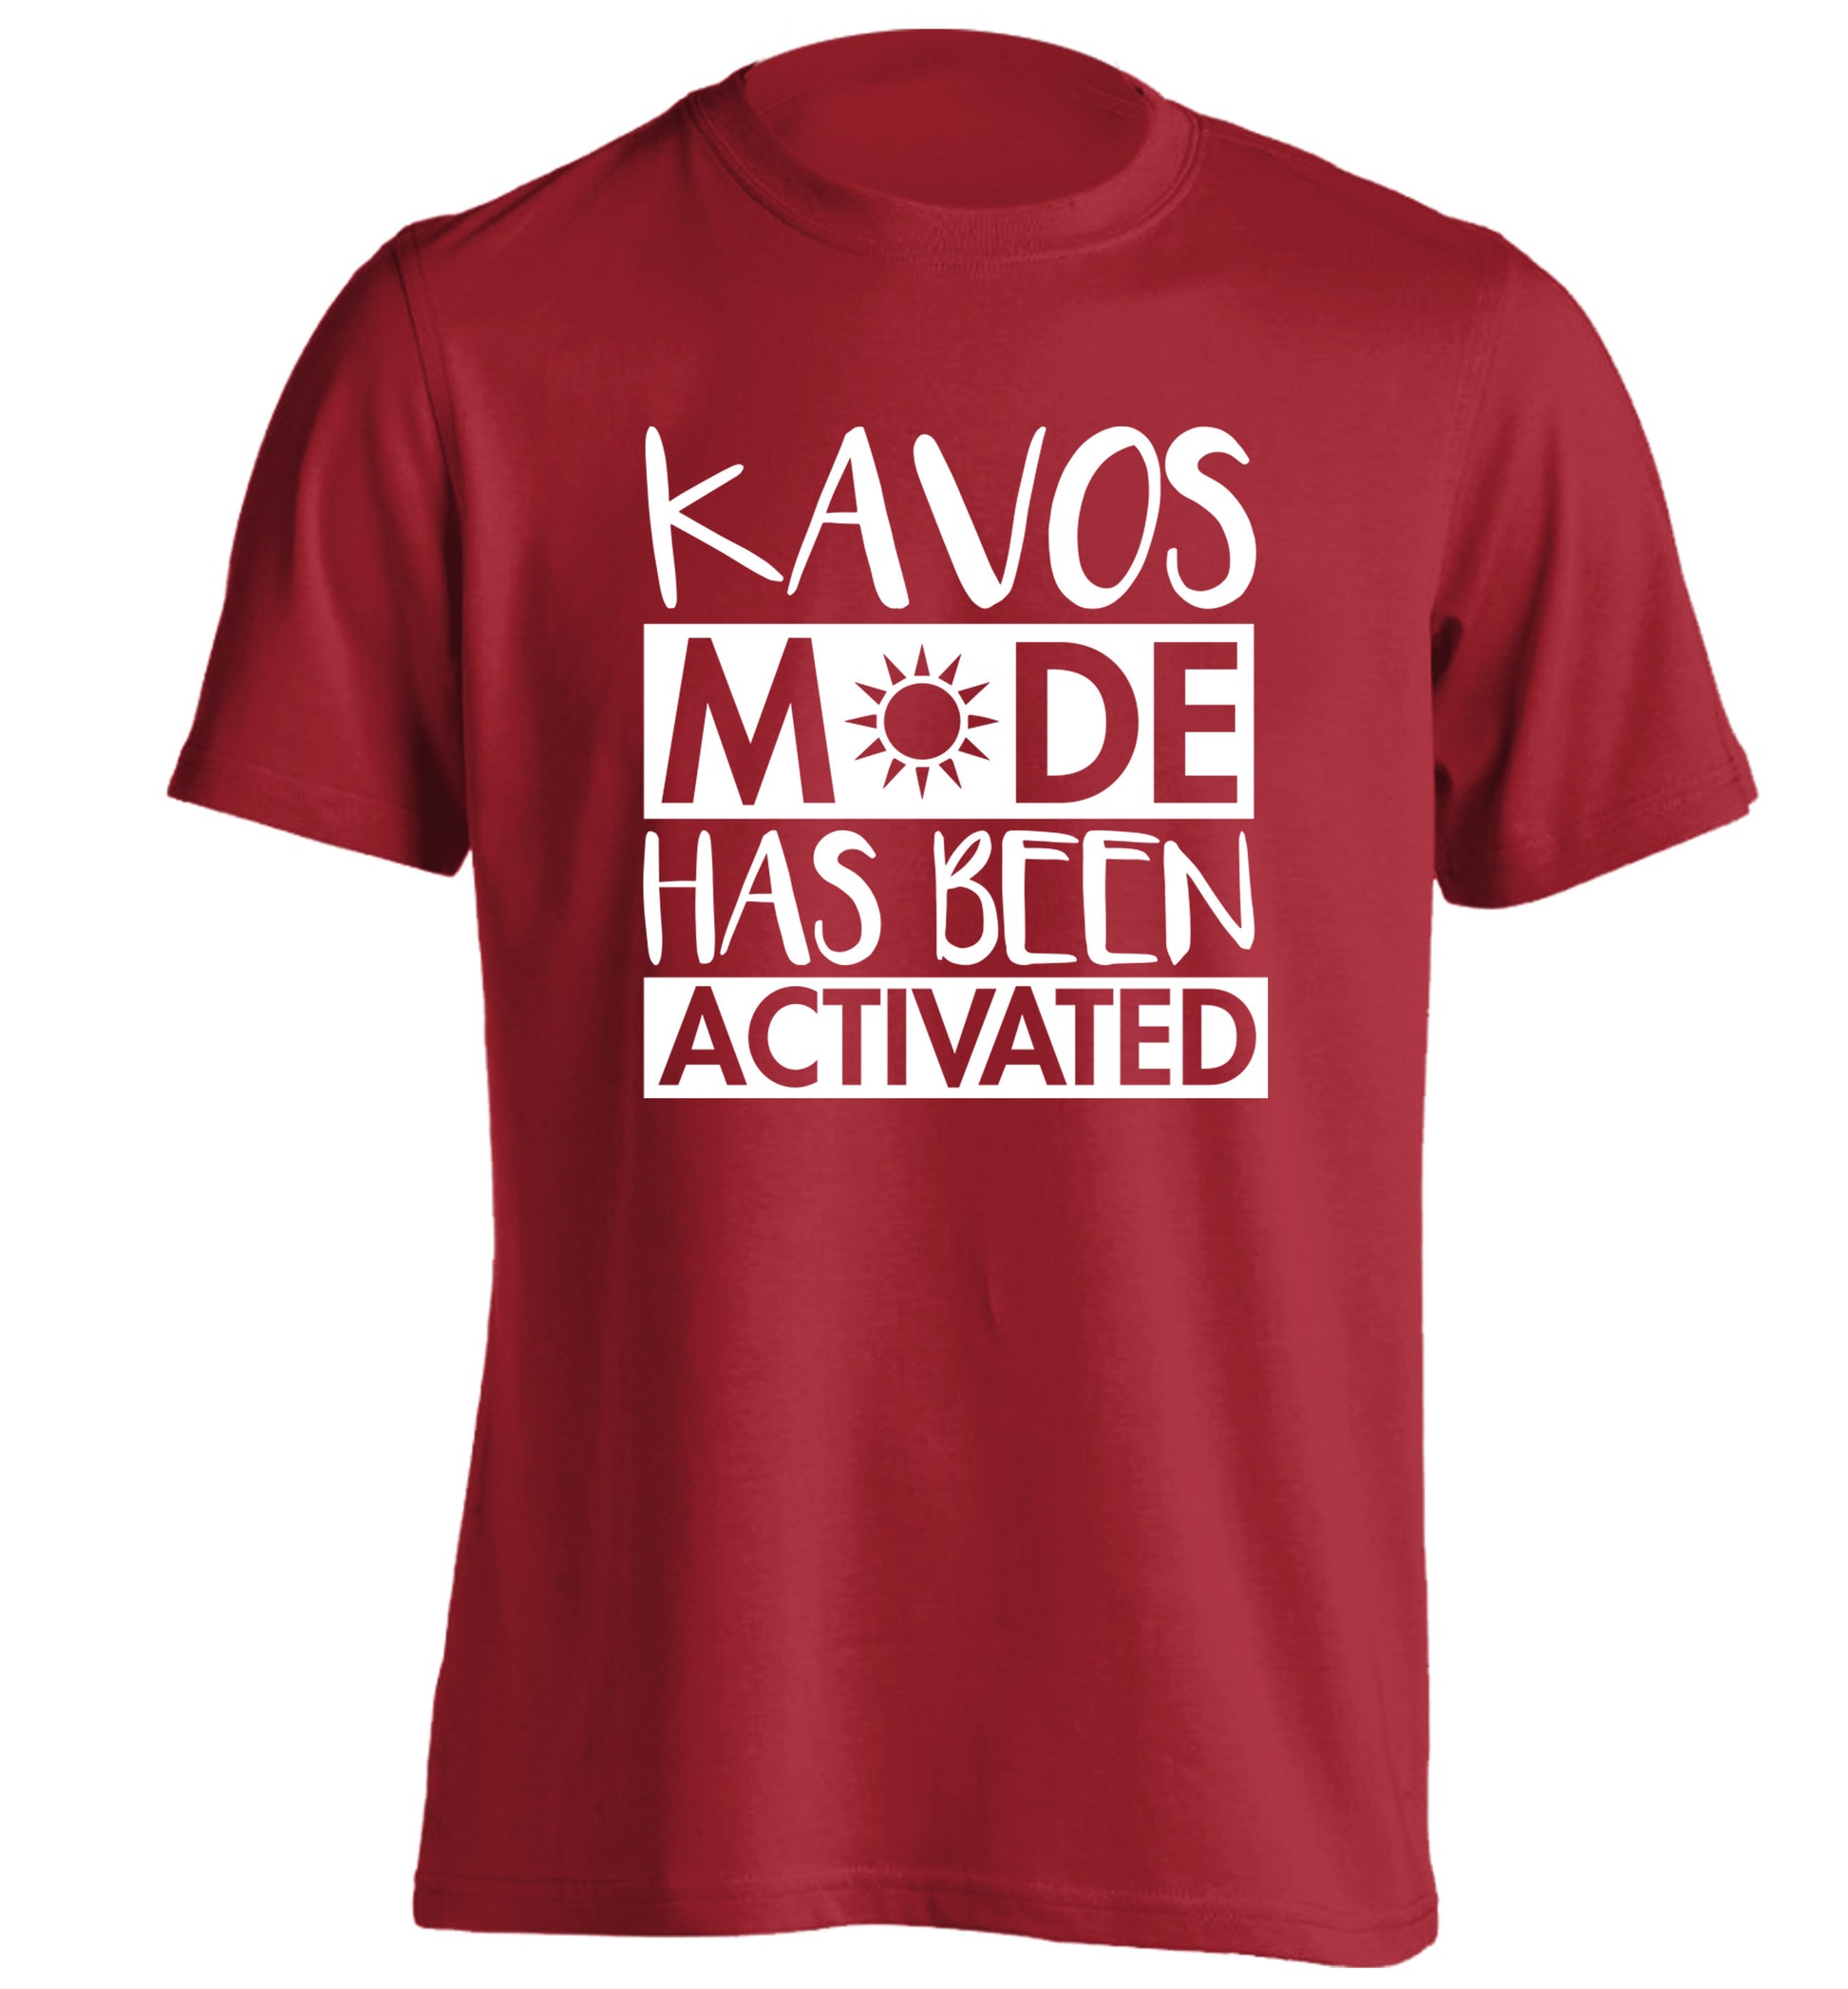 Kavos mode has been activated adults unisex red Tshirt 2XL